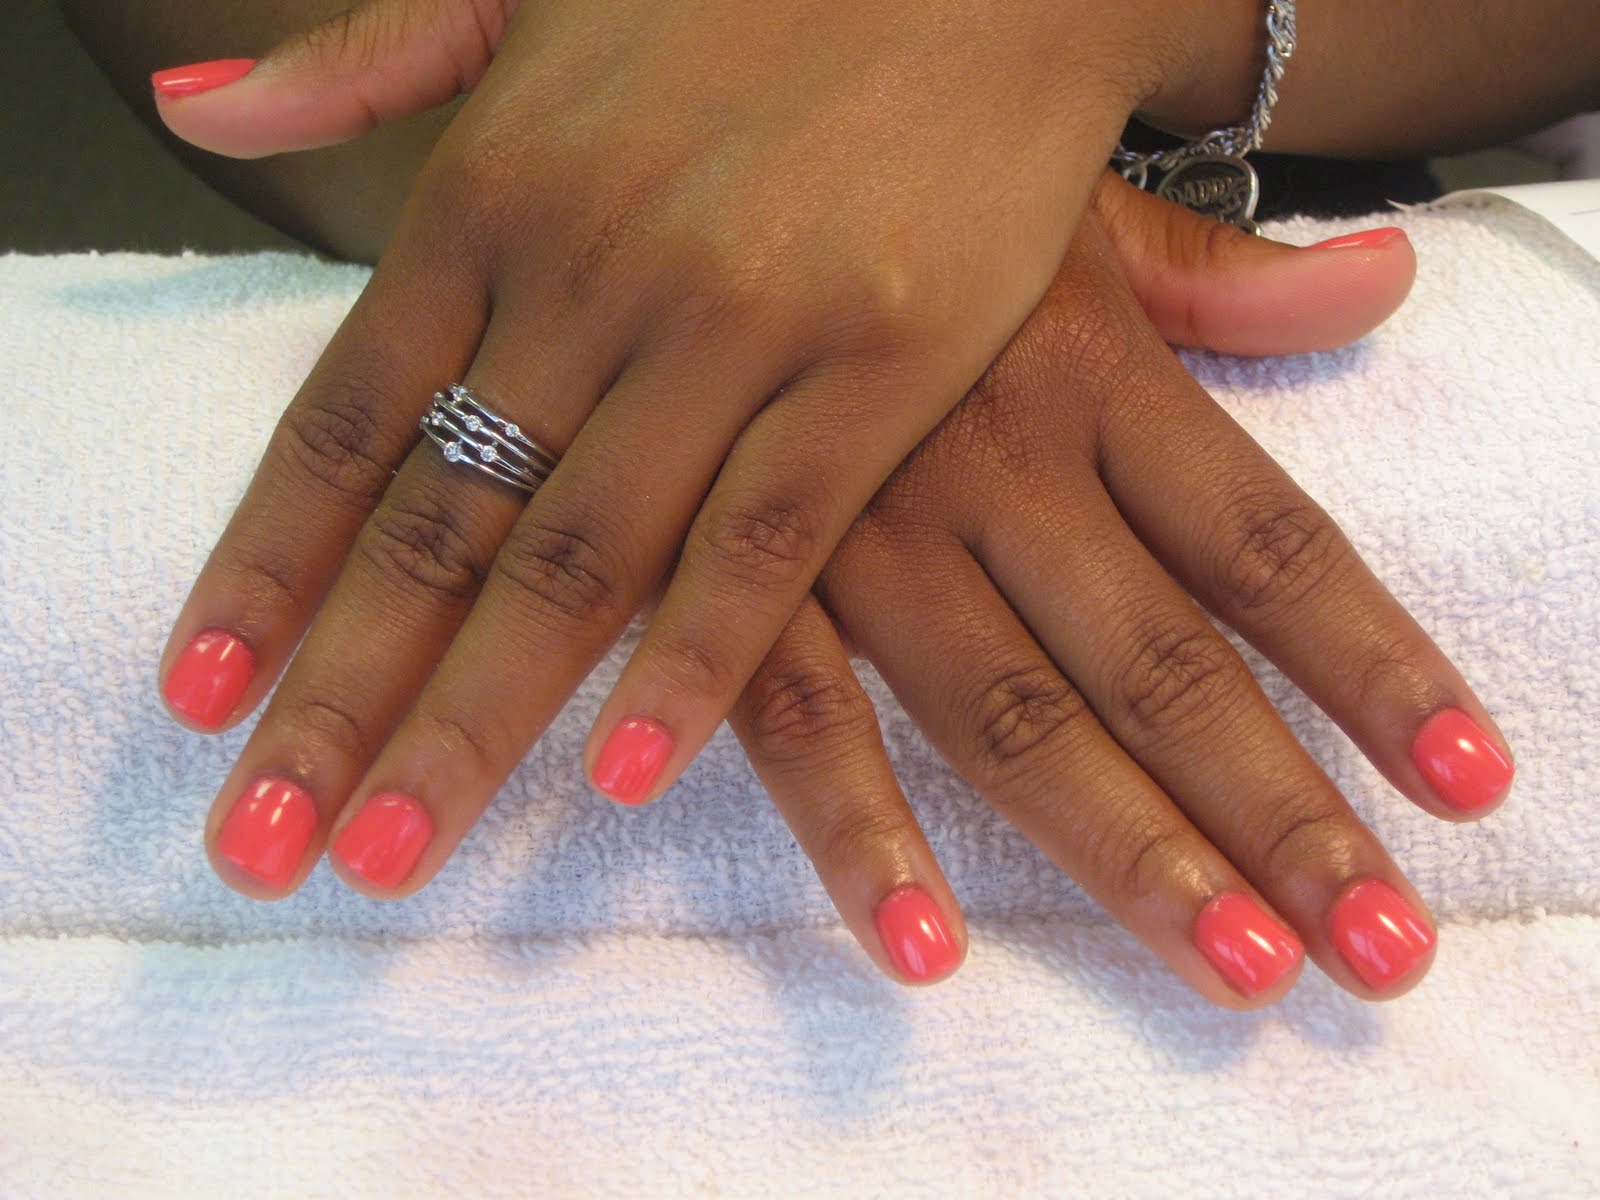 2. Romantic Shellac Nail Designs for Valentine's Day - wide 10